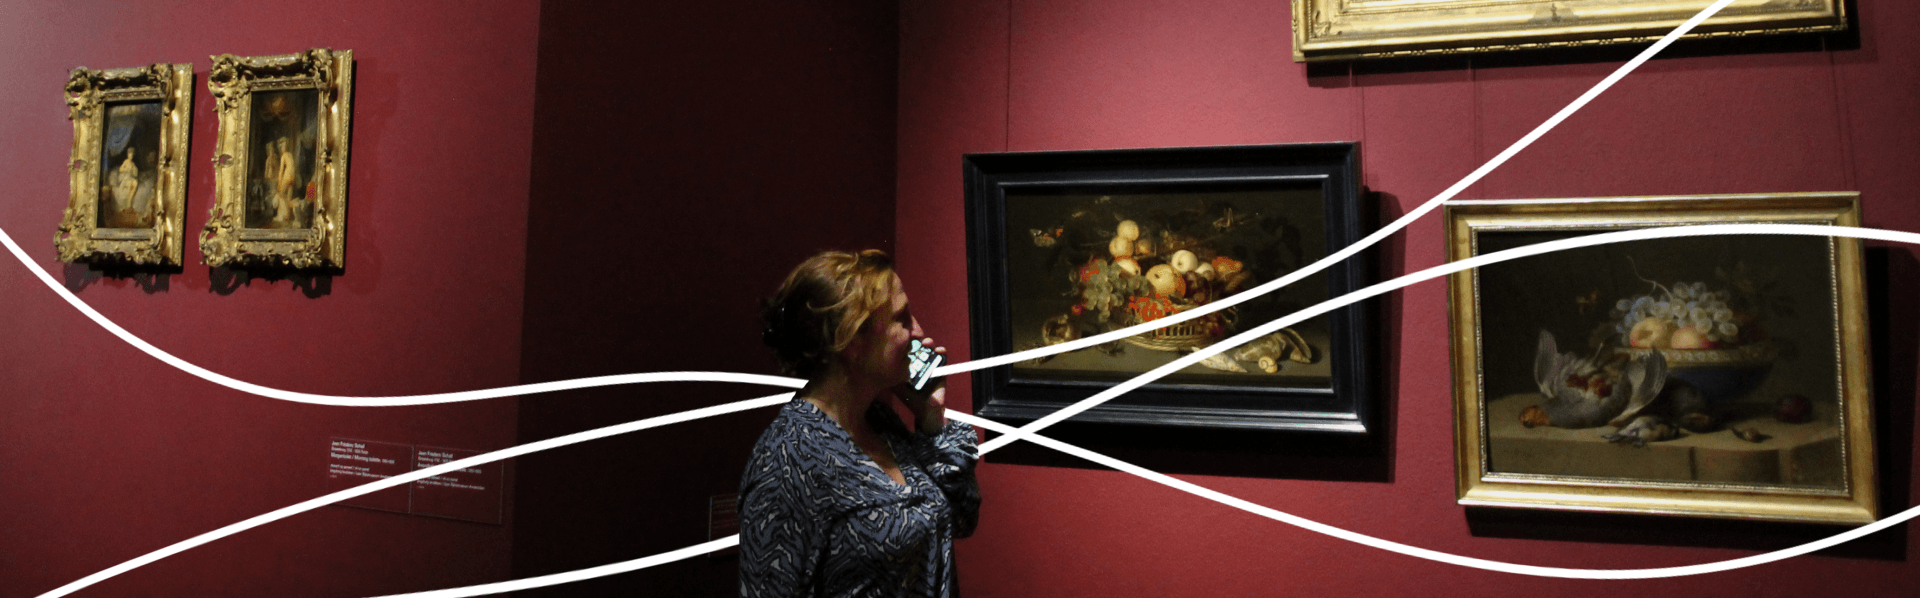 A woman listening to an audio guide in a museum with paintings on the wall and white lines flowing through the photo